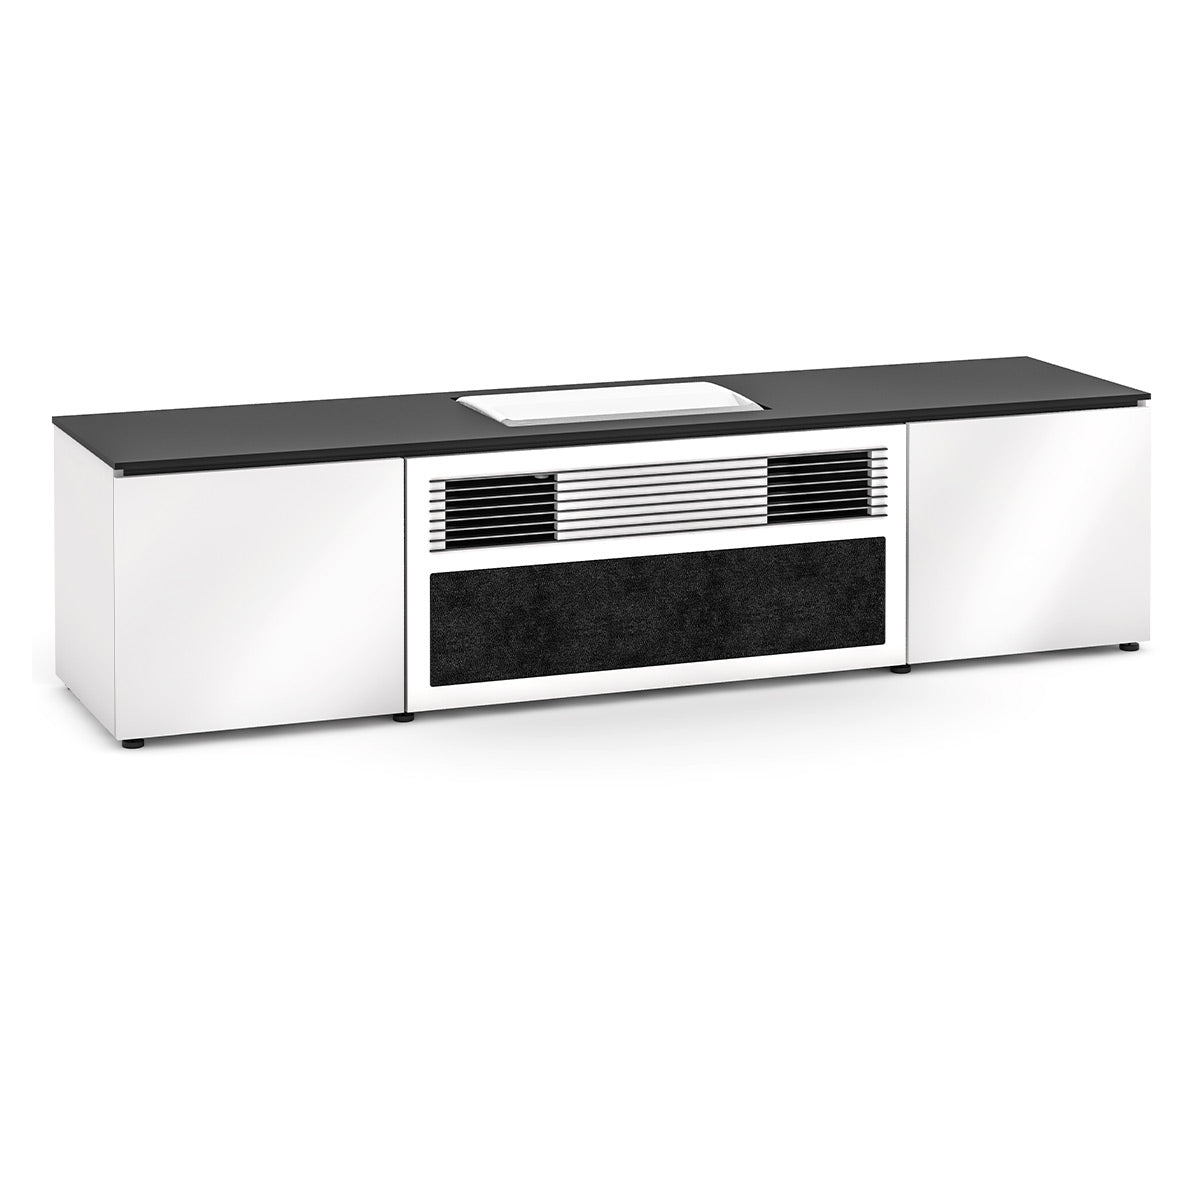 Salamander Miami 245 UST Projector Integrated Cabinet for Samsung LSP9TF (Gloss White)